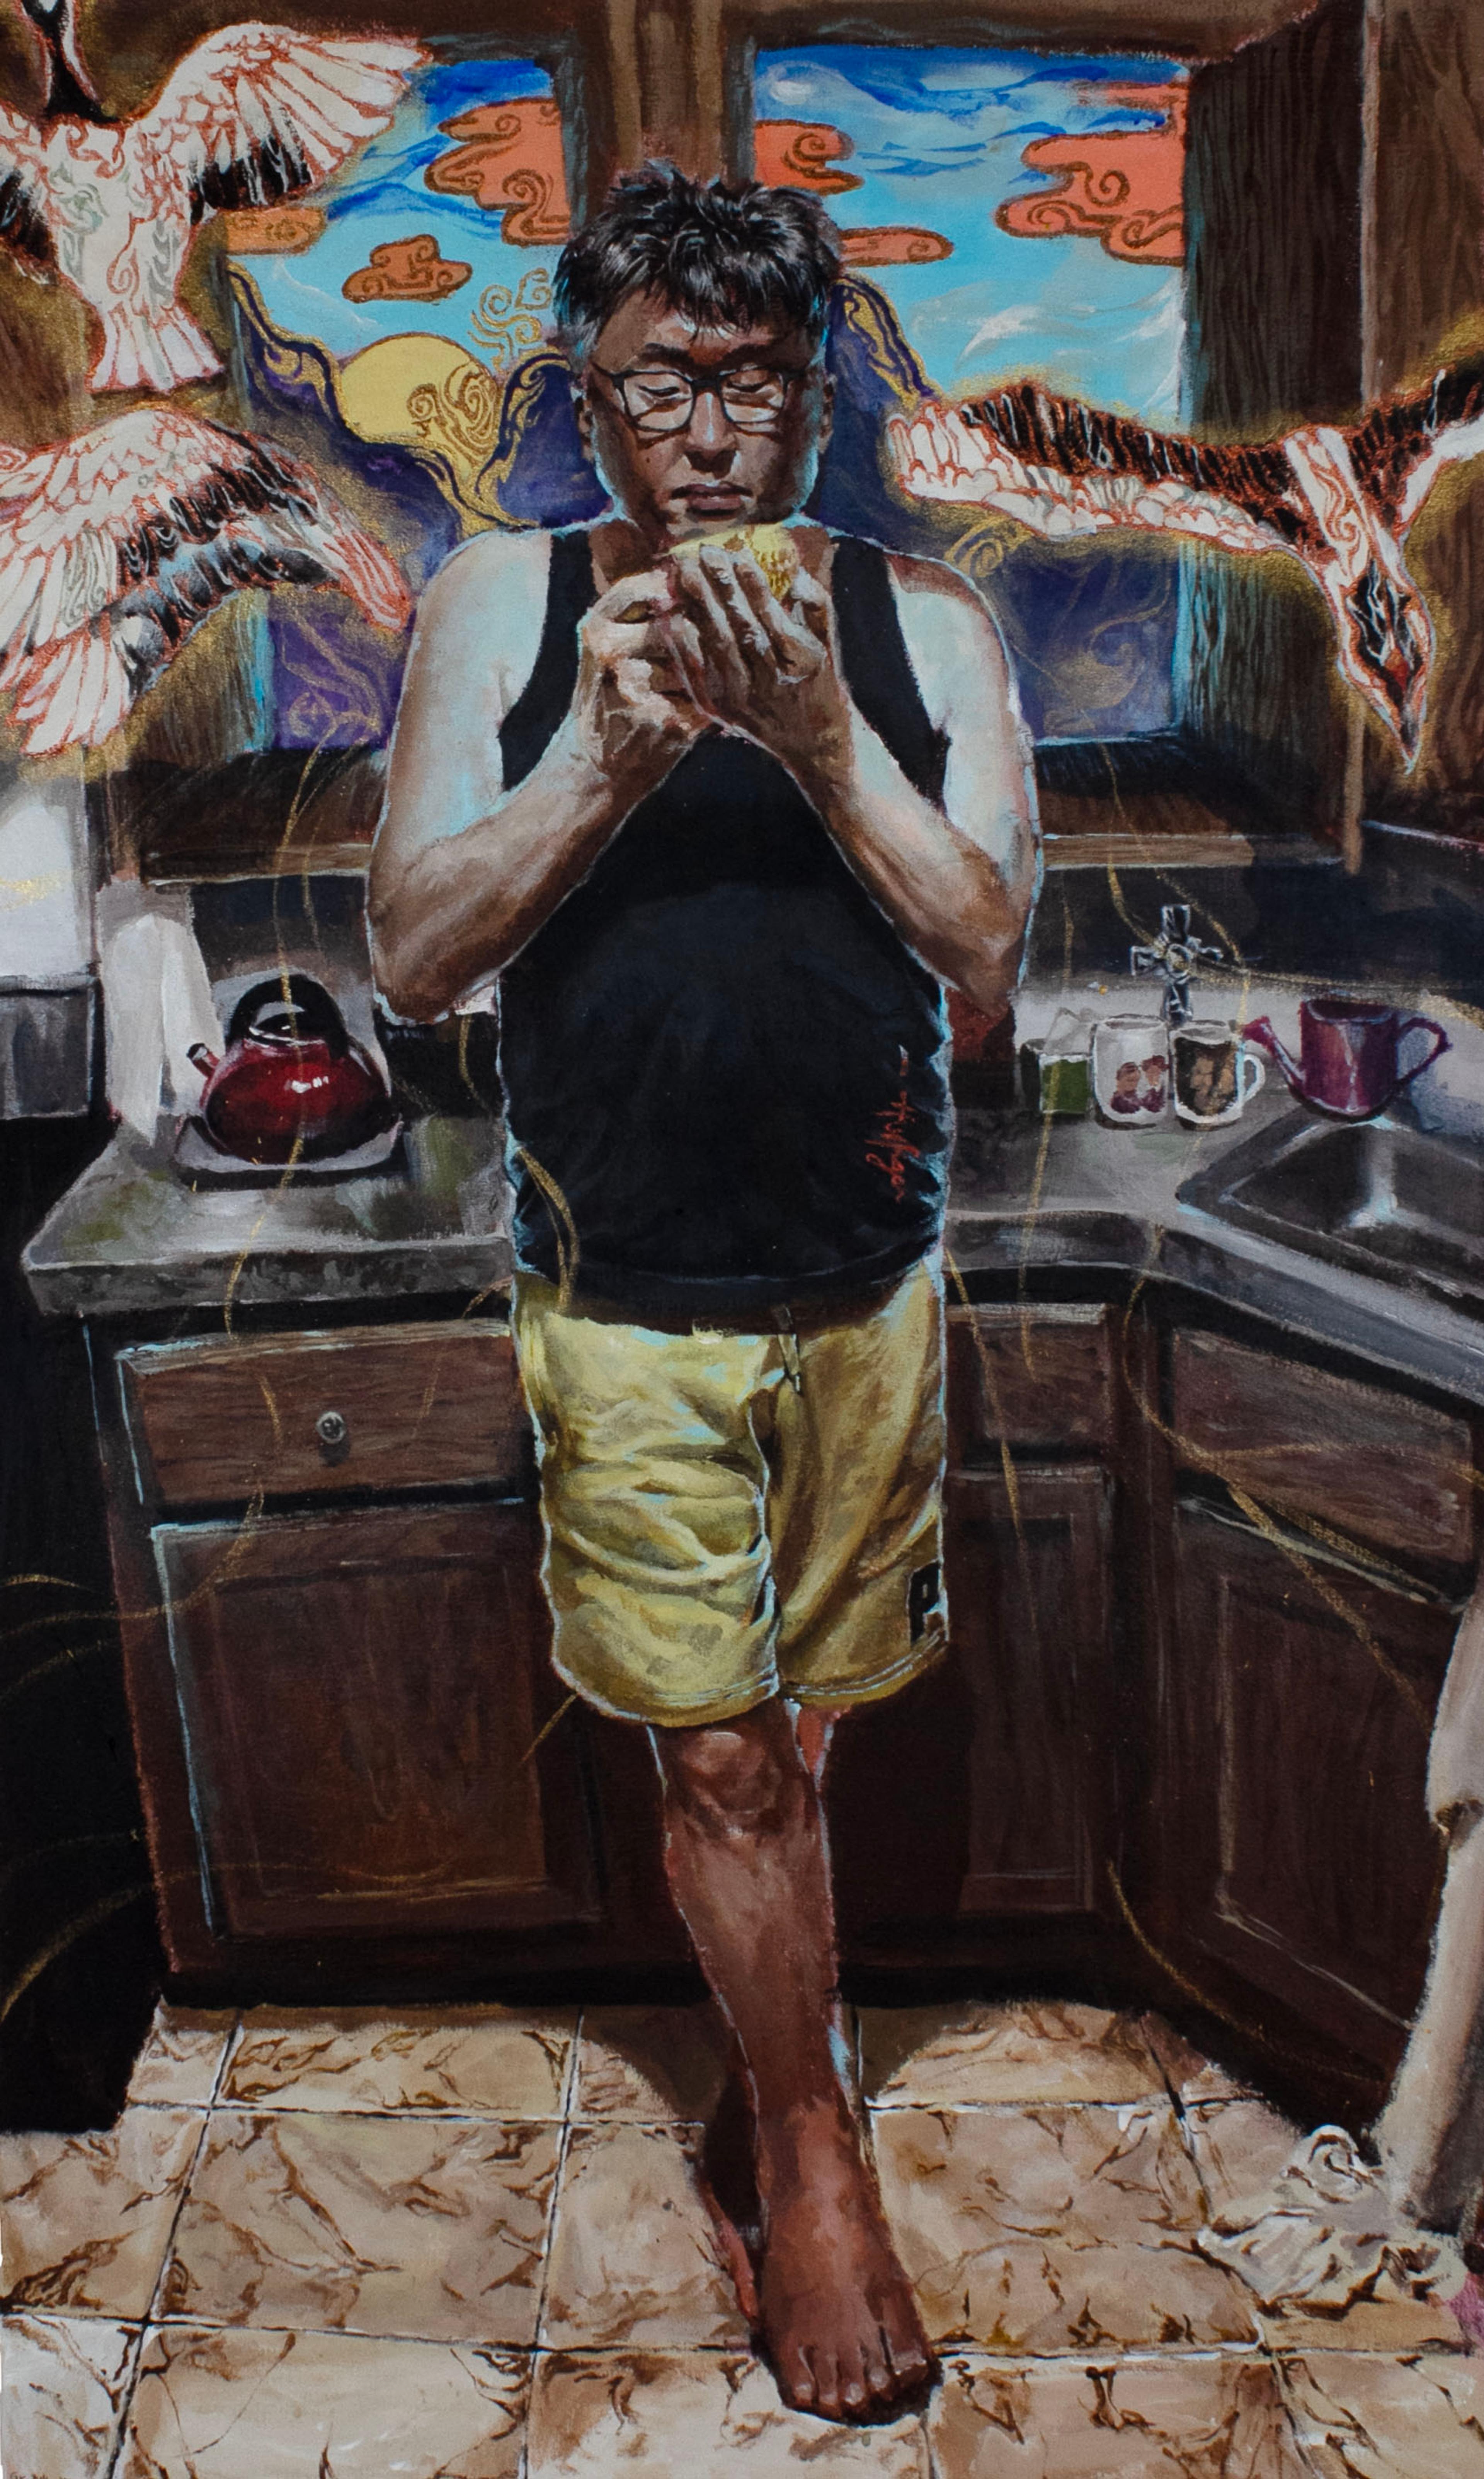 Acrylic painting of a man wearing a black tank top and beige cargo shorts, standing barefoot and leaning against a brown cabinet below a kitchen counter. His feet touch a light brown linoleum floor. He has dark hair, wears glasses, and is examining an object held closely in front of him in both hands. A red teapot is on the counter to the left, and a few drinking cups sit next to a sink on the right. Three Impressionistic birds are drawn flapping around the man's head and shoulders, and the wall cabinet behind him is opened to reveal an Impressionistic blue sky adorned with swirly orange clouds and a big yellow sun.